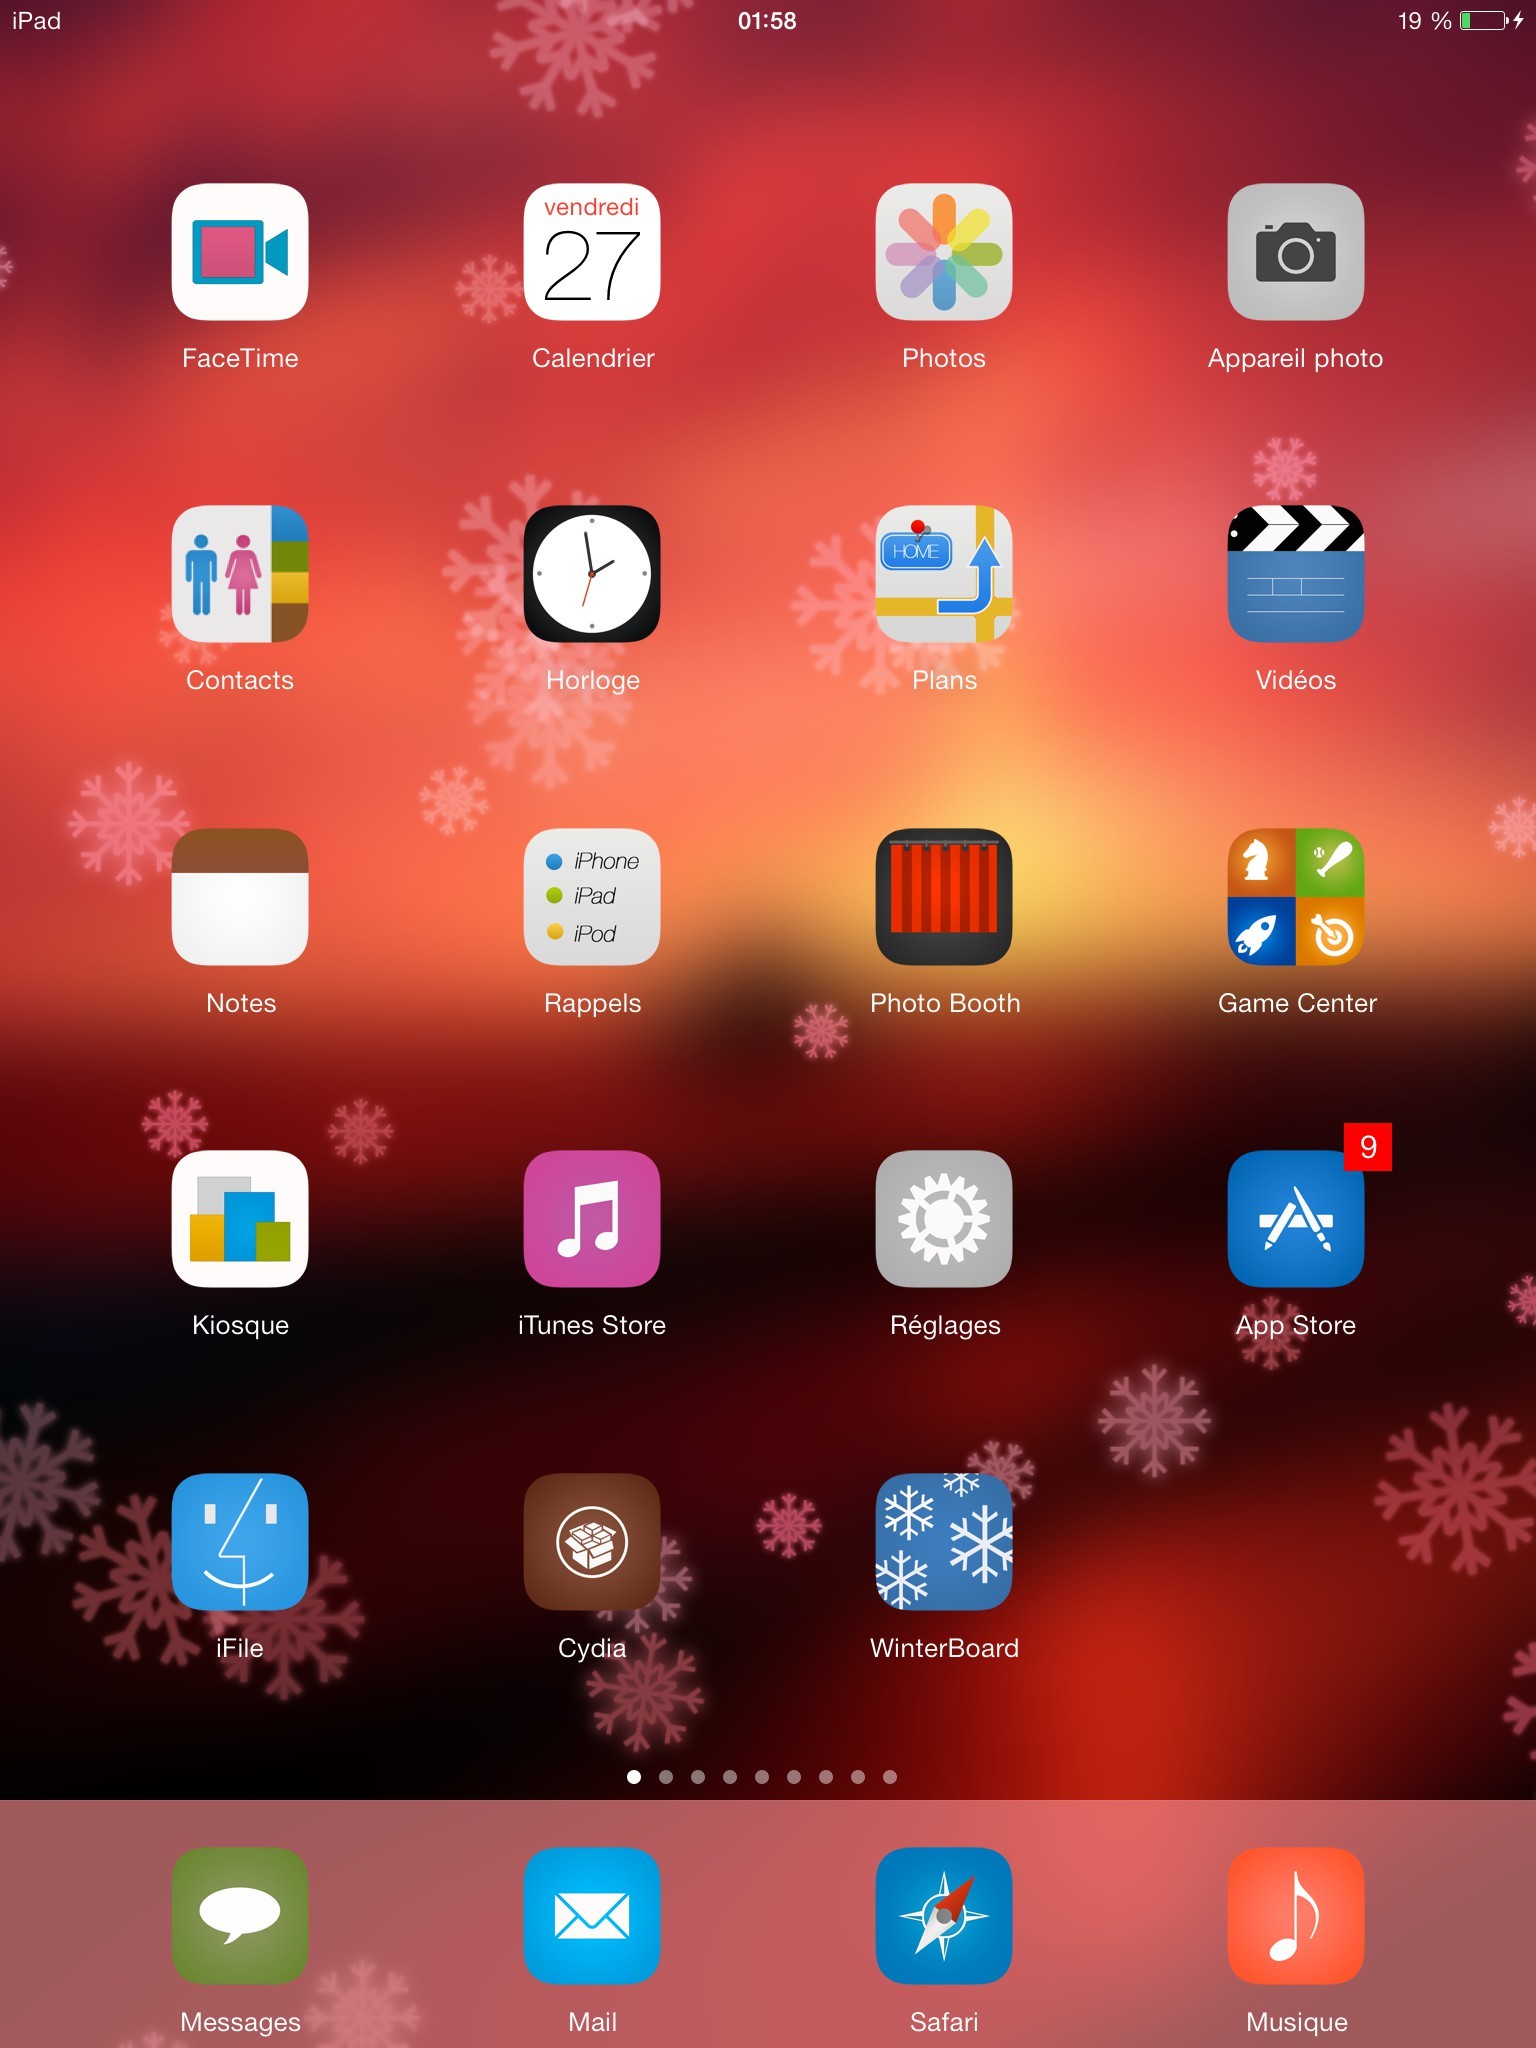 Perfect How To Set Live Wallpaper On Ipad Air 3 with Epic Design ideas